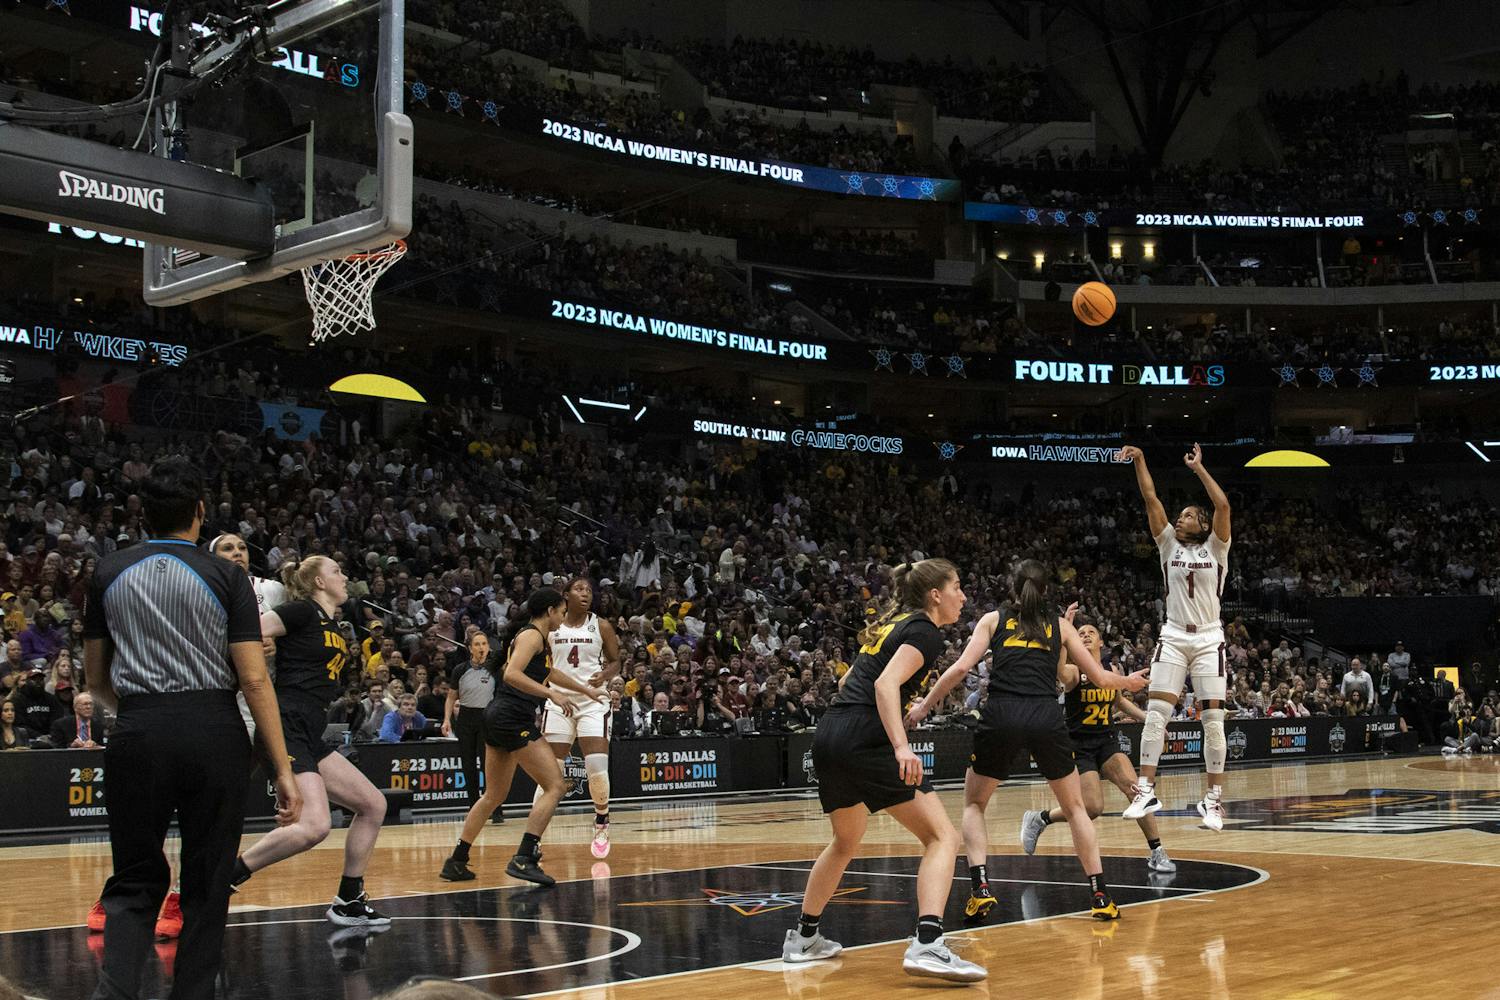 The Women’s 2023 Final Four game saw an intense matchup between the University of South Carolina Gamecocks and the University of Iowa at the American Airlines Center in Dallas, Texas, on March 31, 2023. Iowa held the lead throughout the majority of the game. In the end, the Gamecocks lost against the Hawkeyes 77-73, snapping its 42 win streak.